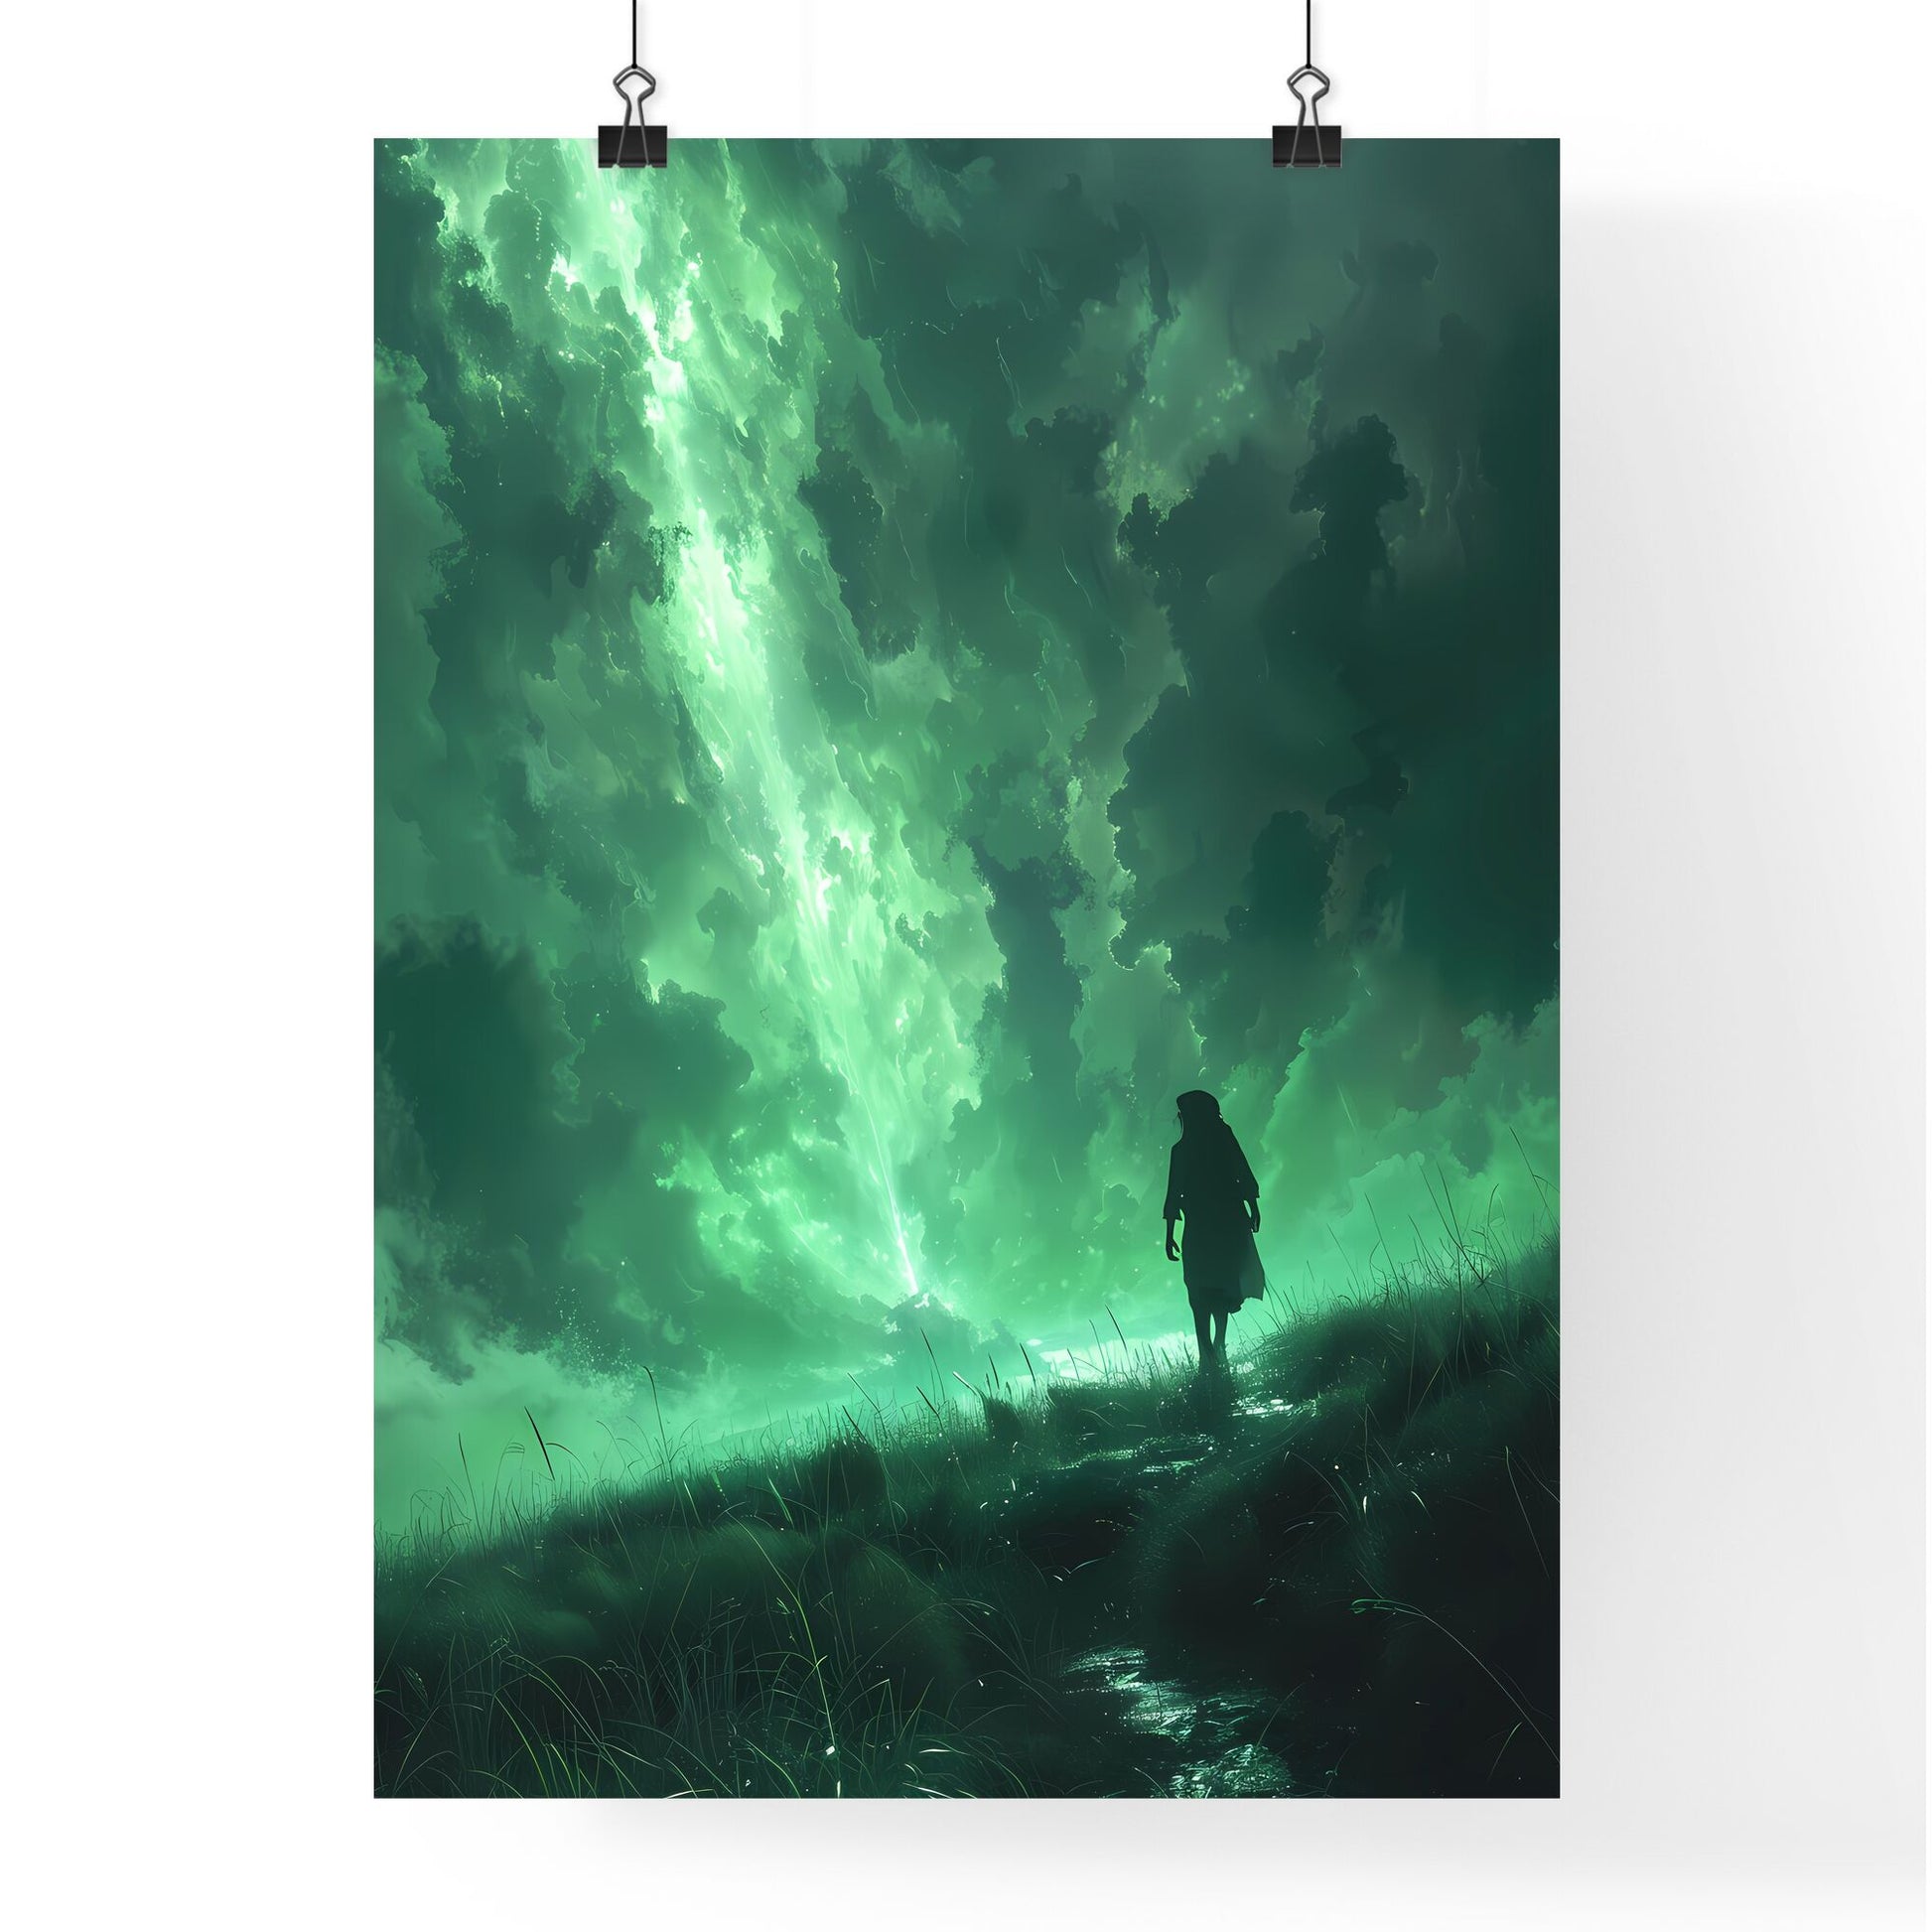 Surreal Savanna Silhouette: Fantastical Painting of a Person in an Expansive Green Field Bathed in Ethereal Light Default Title